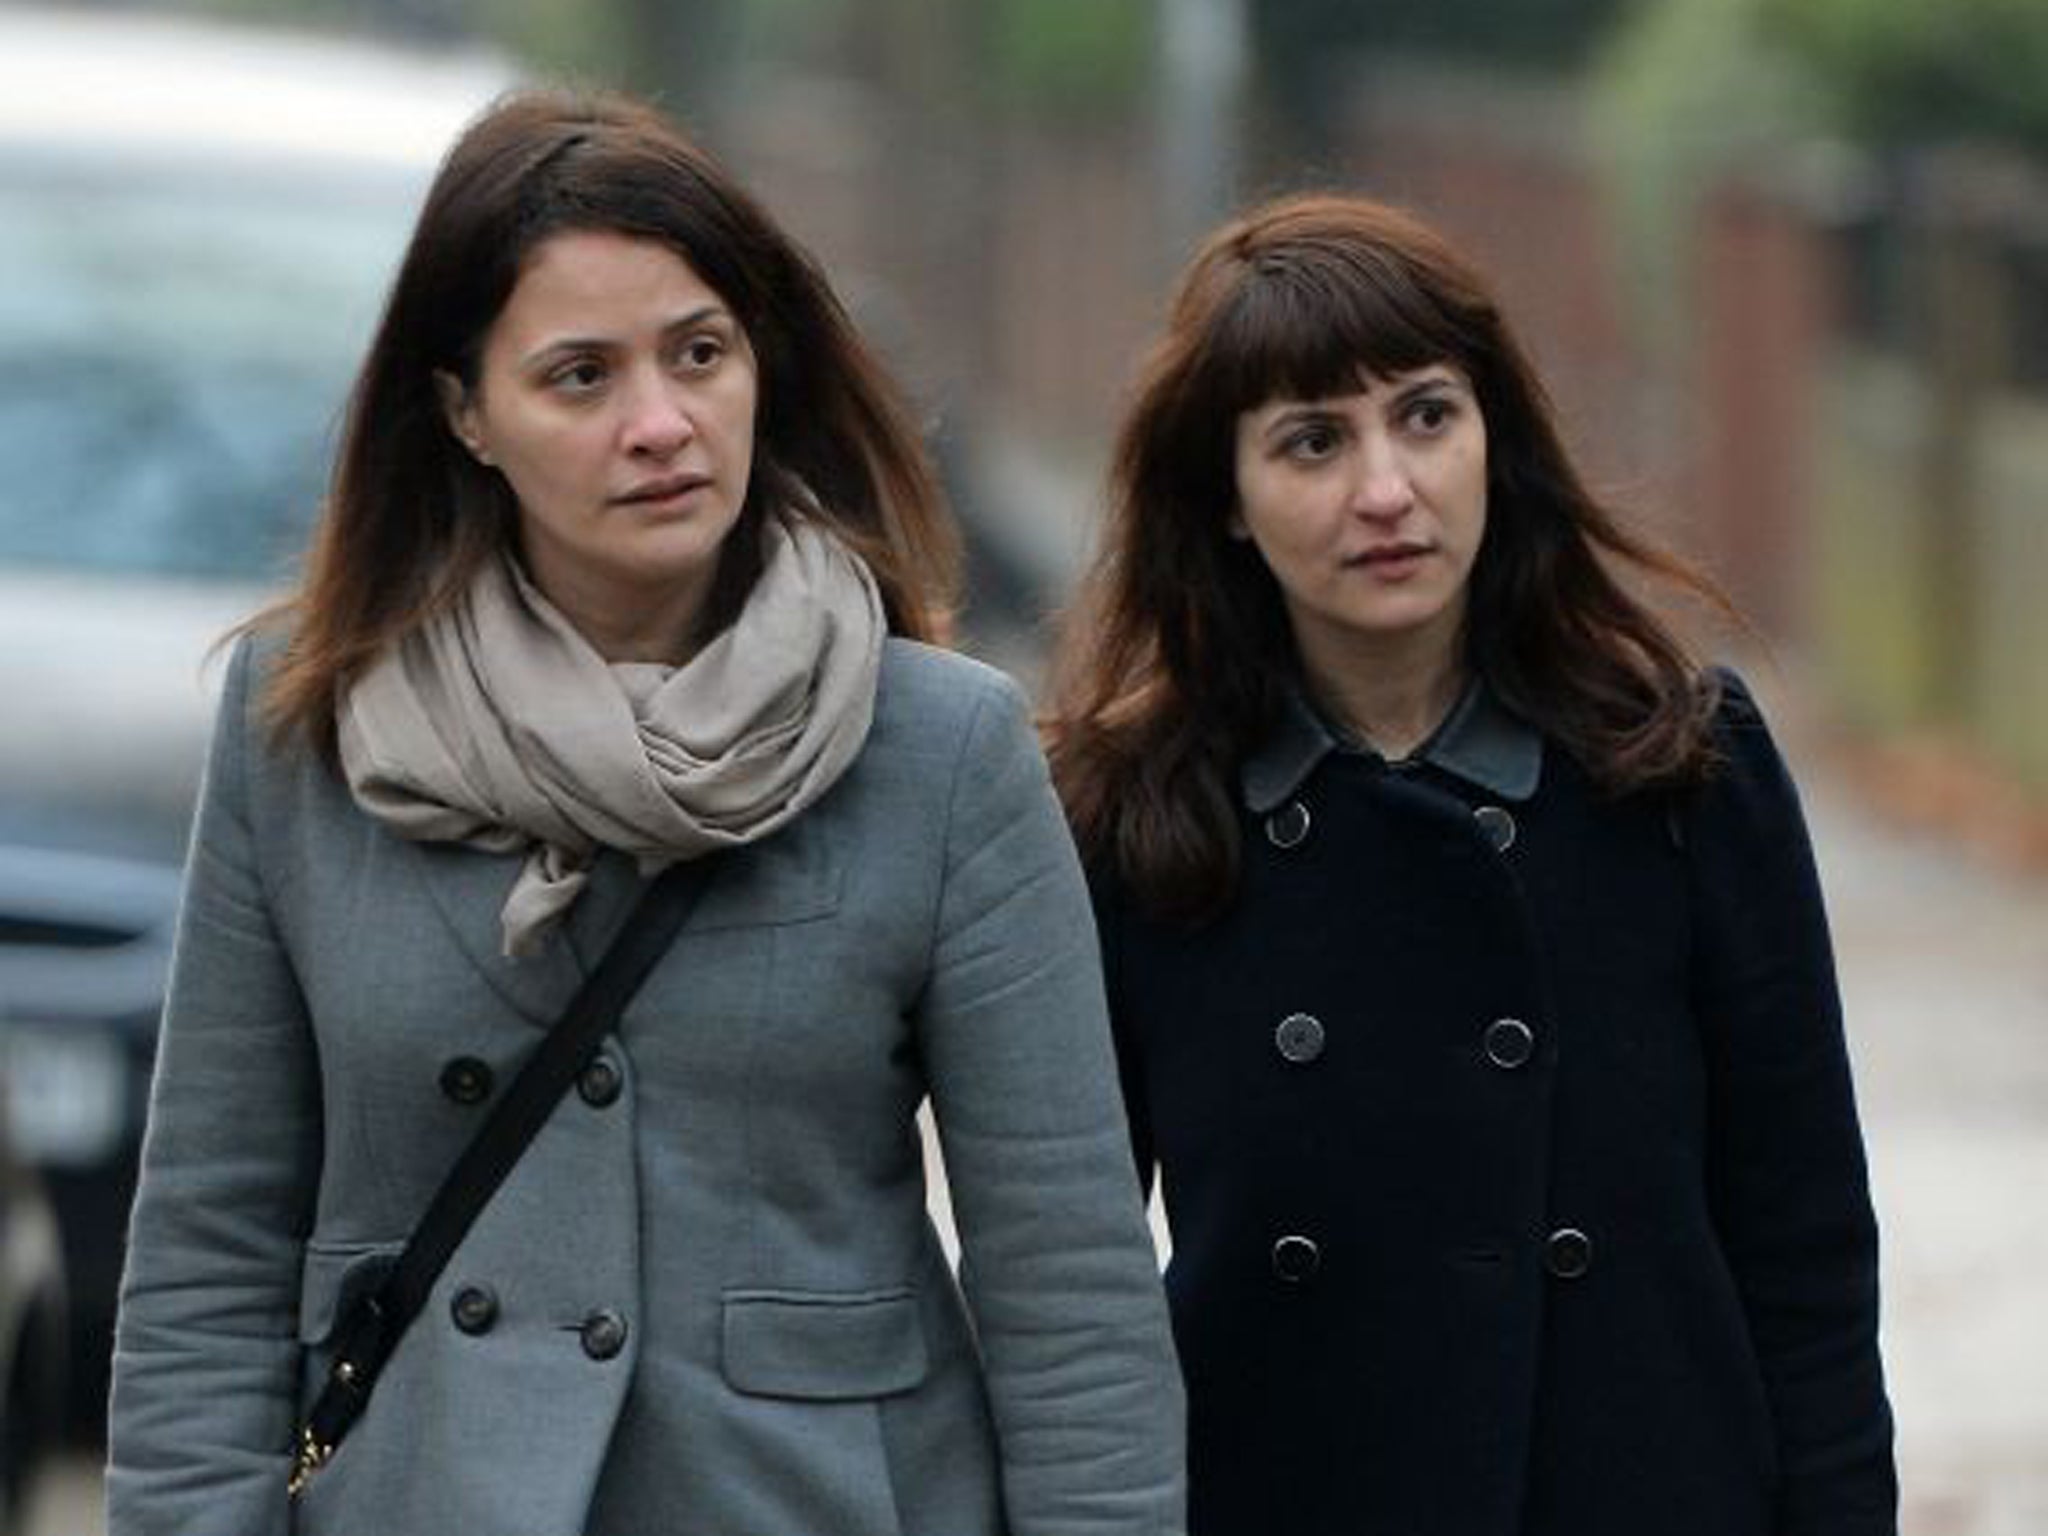 Elisabetta Grillo (left) and her sister Francesca at Isleworth Crown Court yesterday